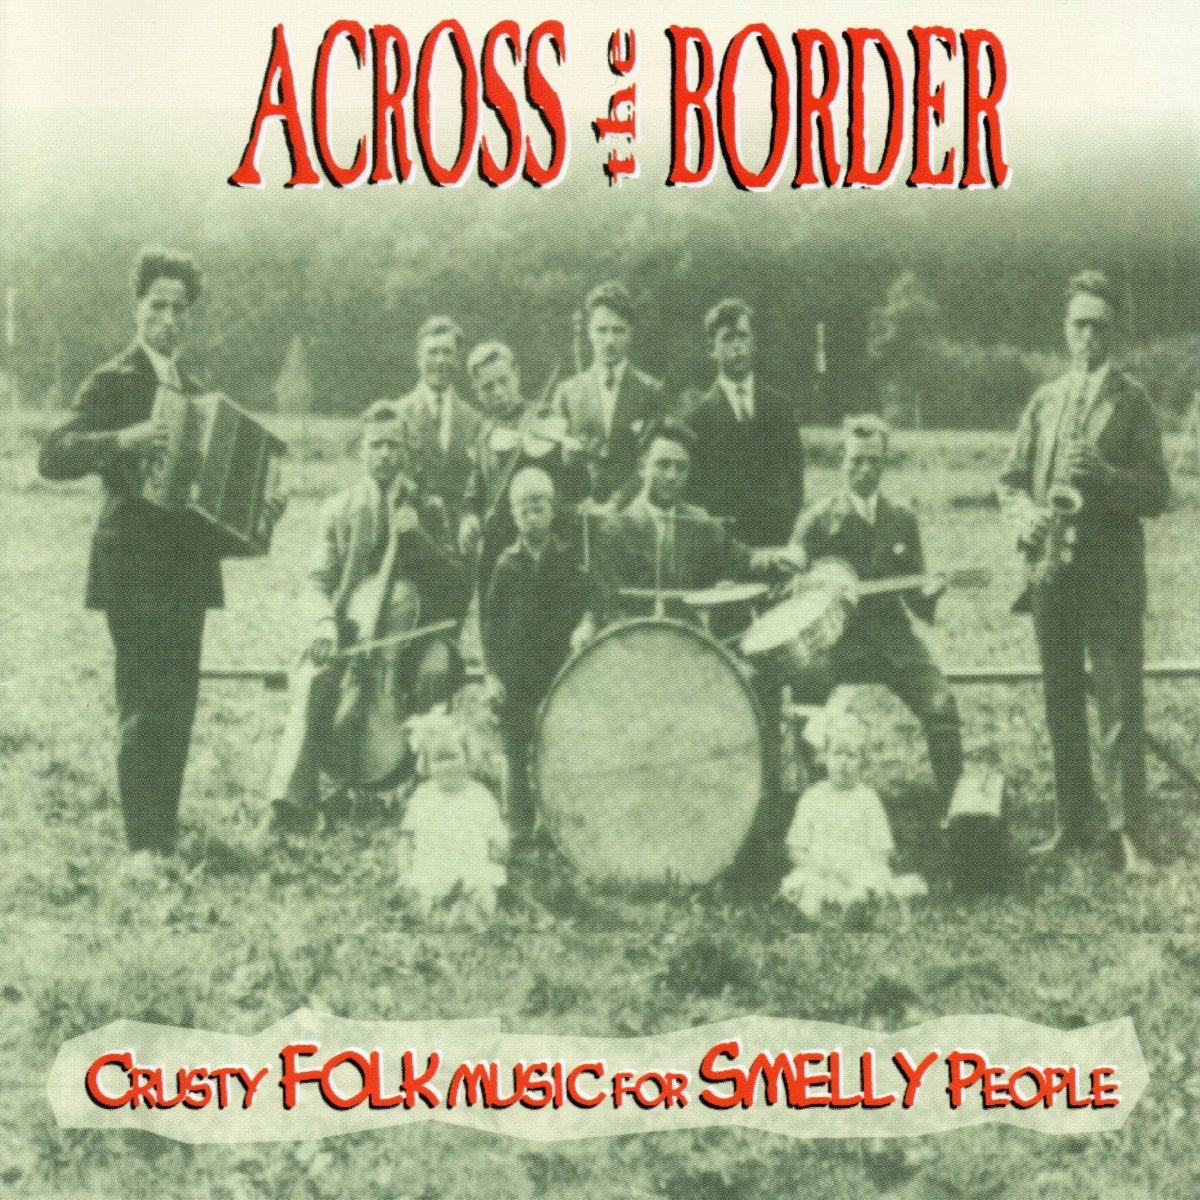 Across The Border-Crusty Folk Music For Smelly People-CD-FLAC-1996-FiXIE